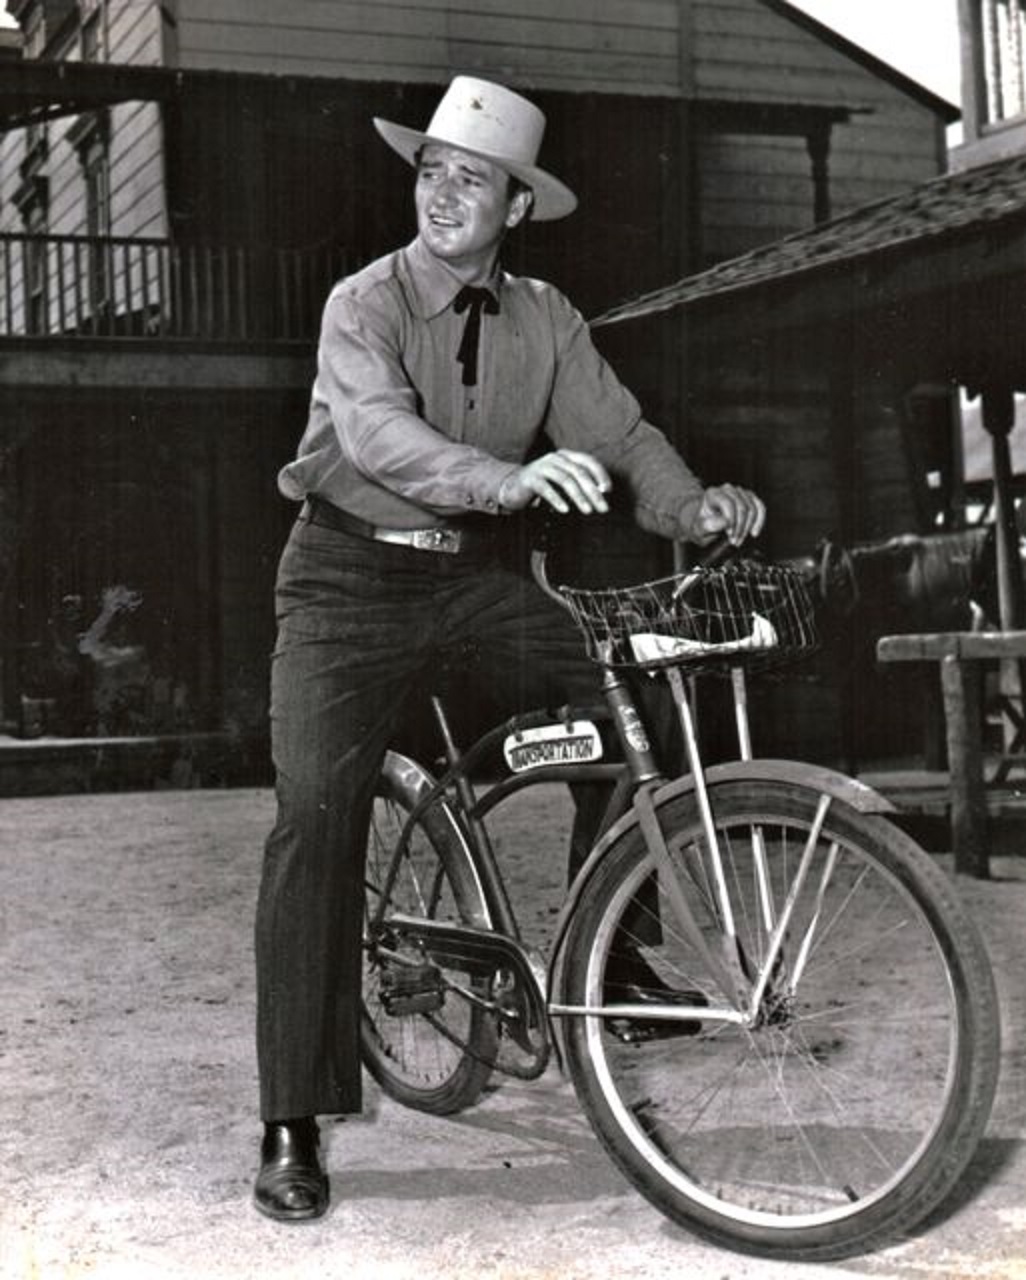 And yes, even John Wayne rode bikes when his horse was in the shop